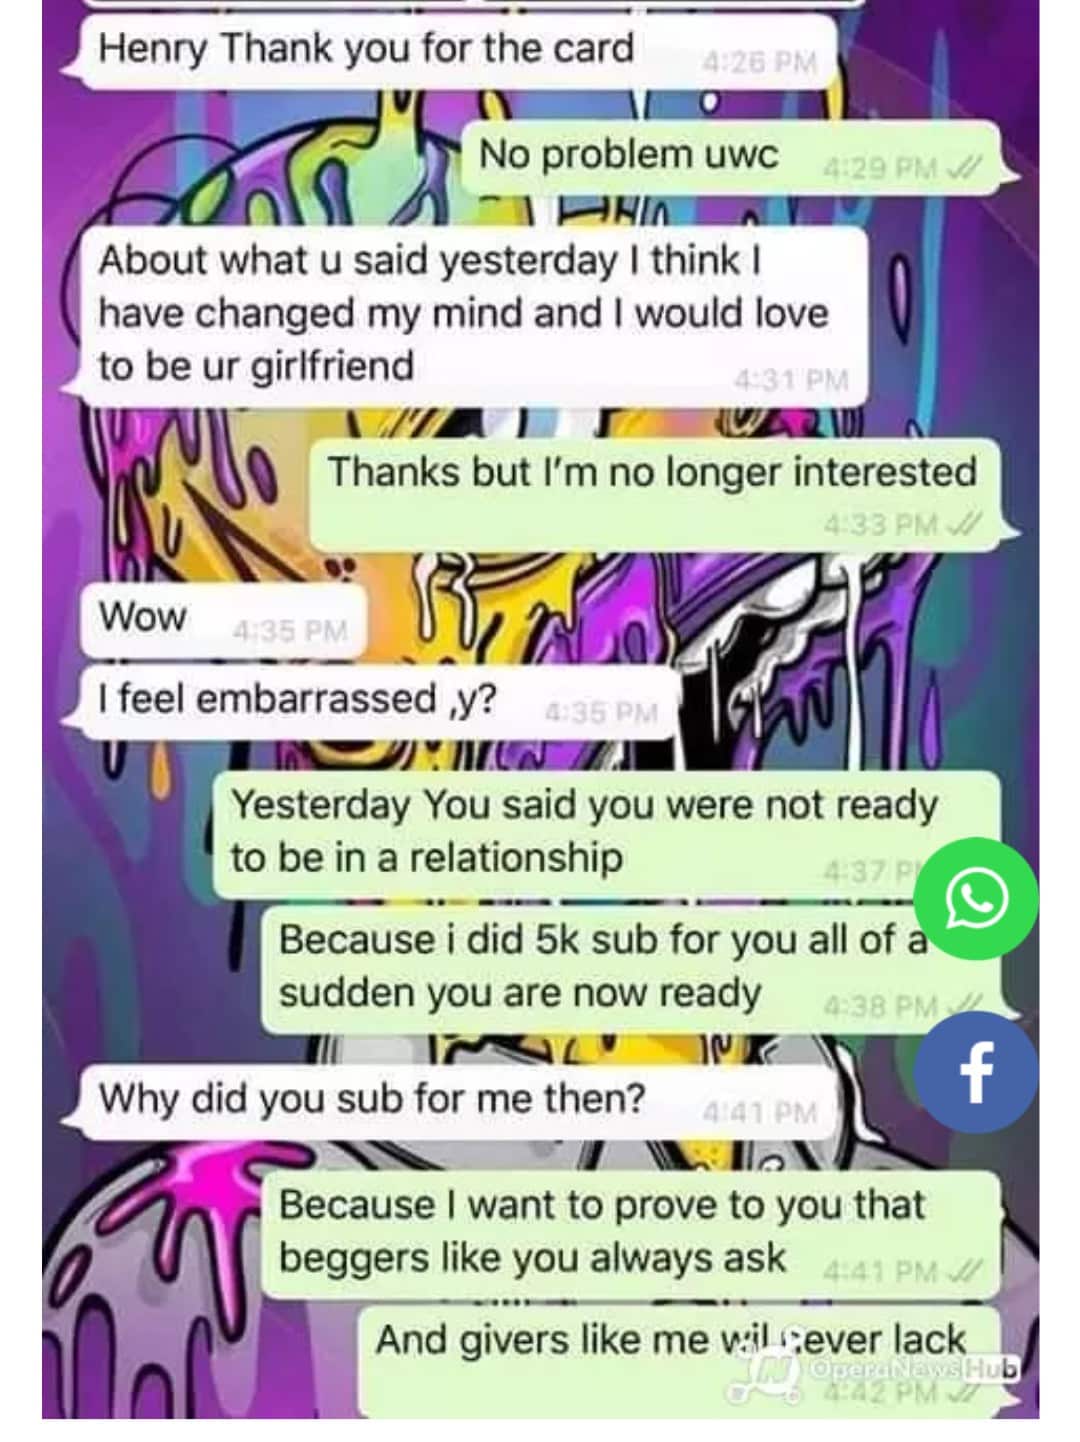 Lady Rejected Man's Proposal And Later Accepted After He Sent Her 5k